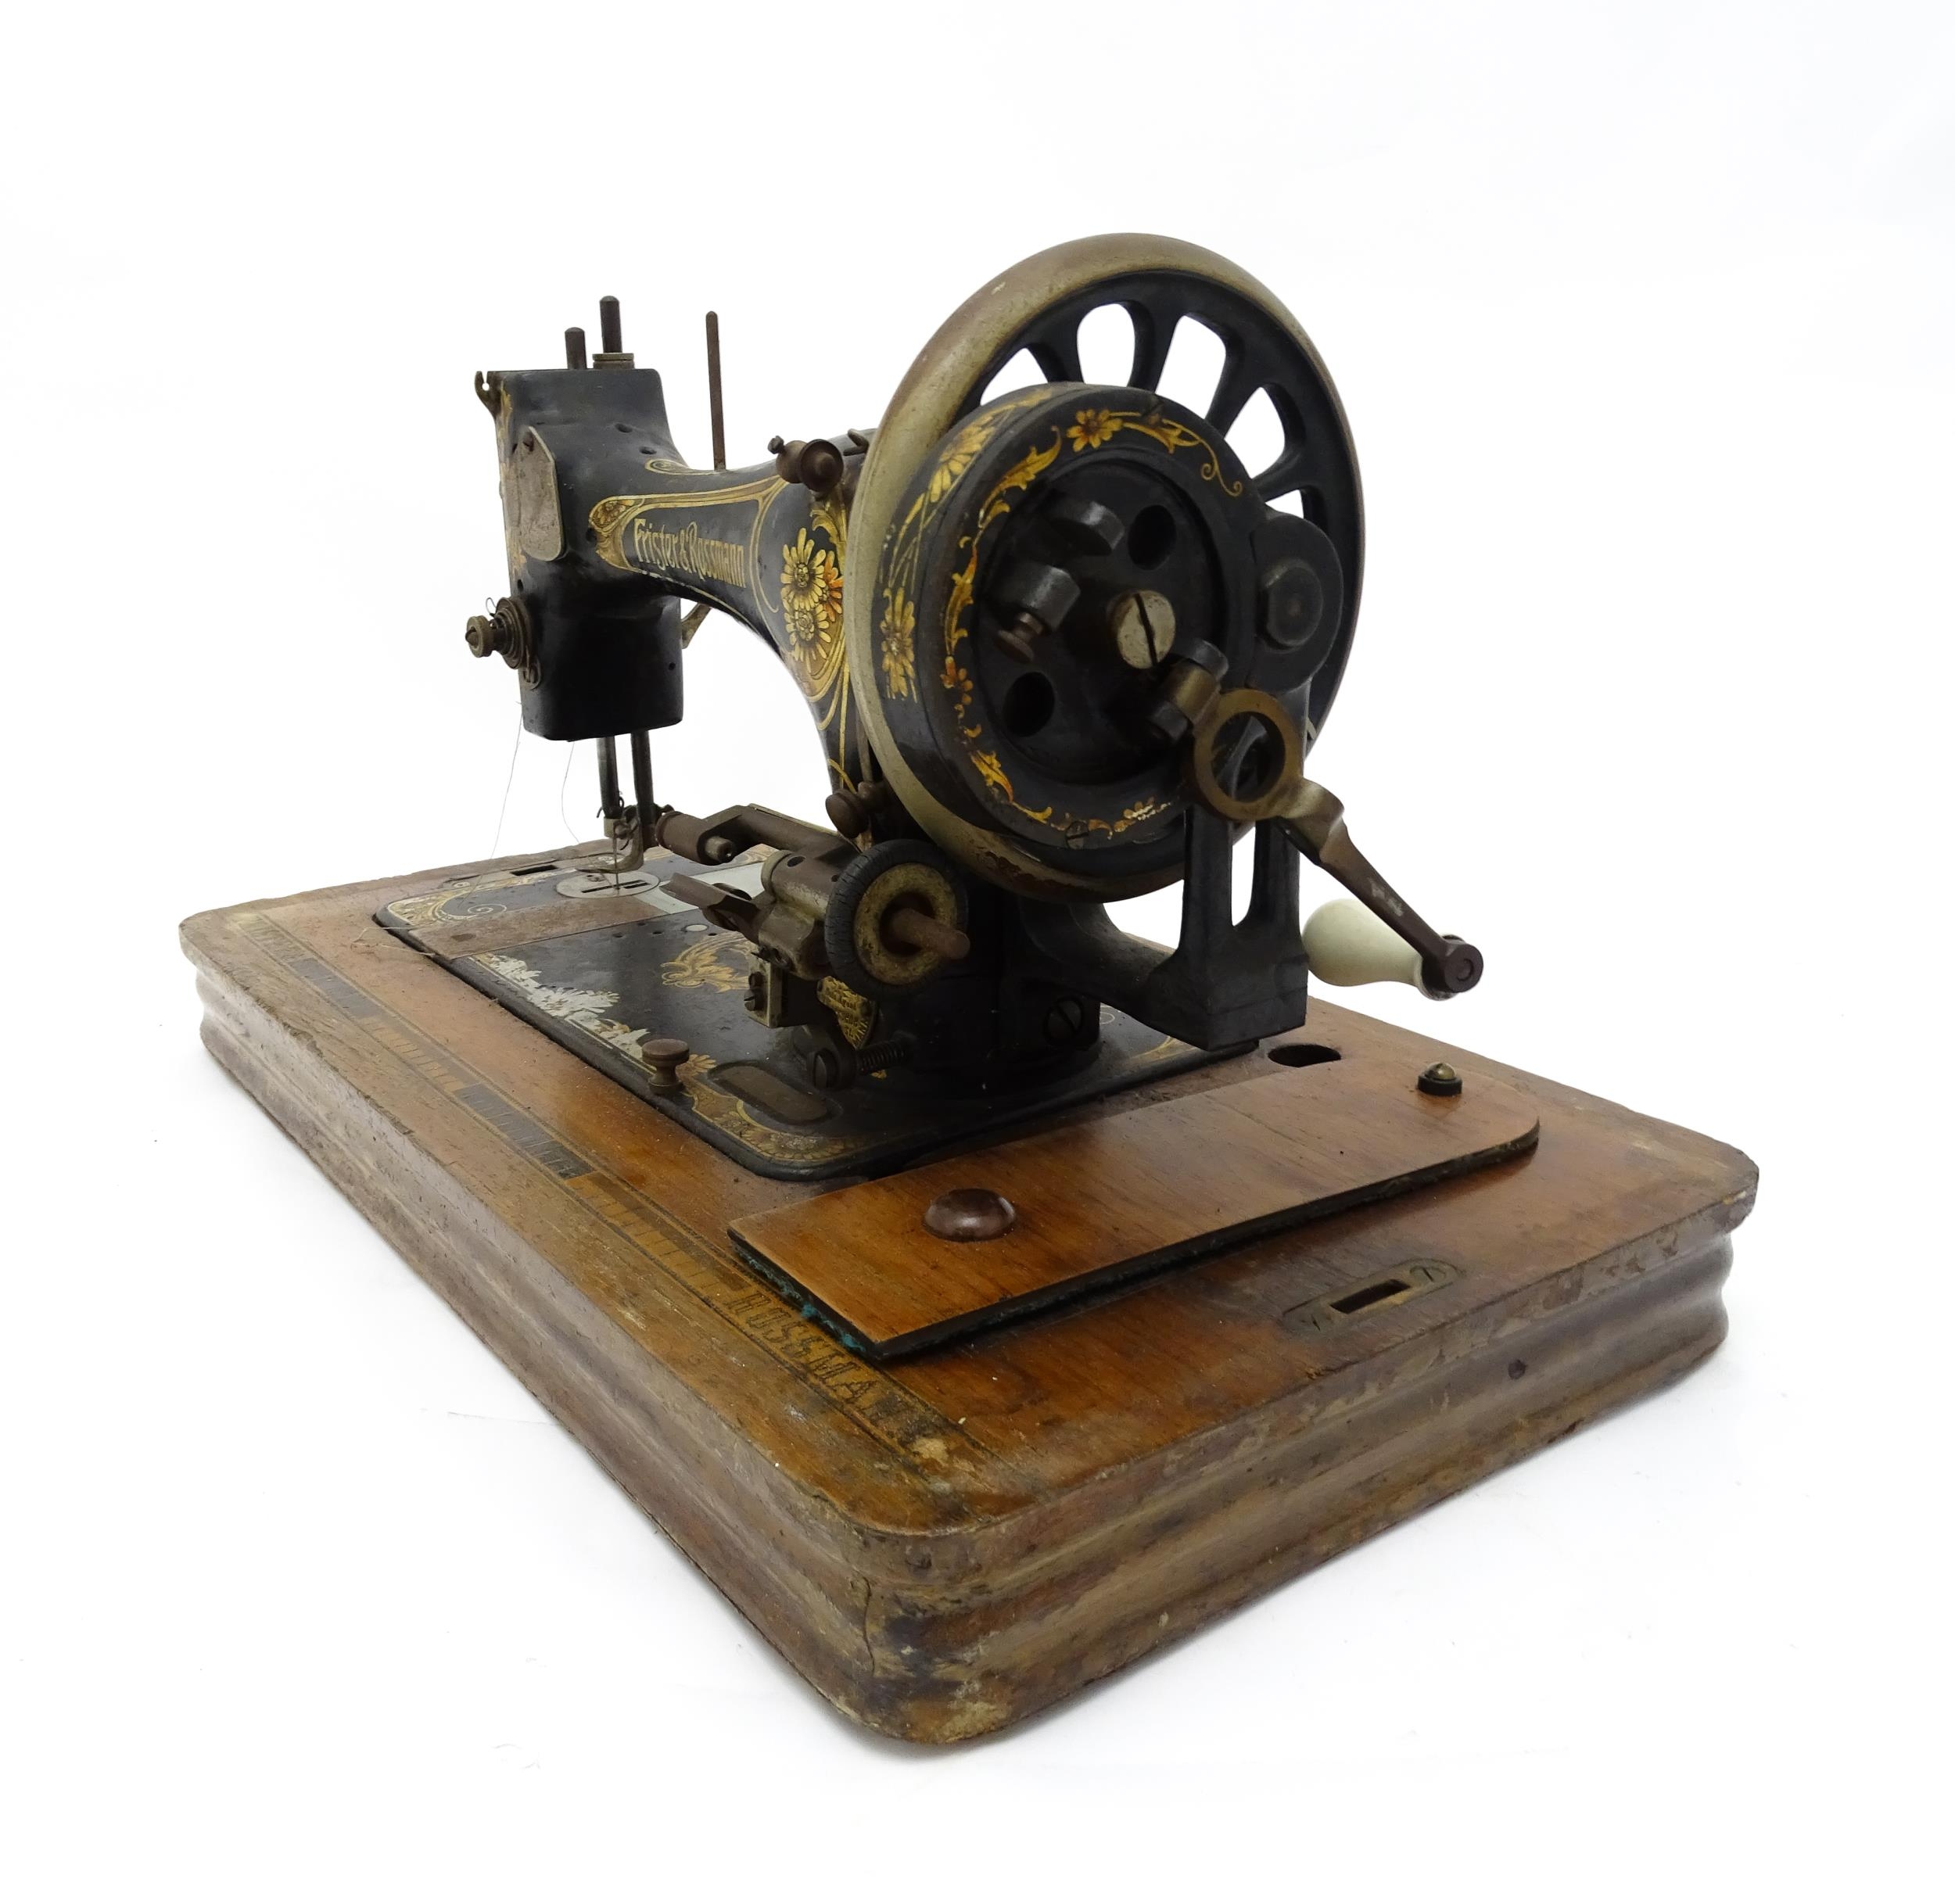 An early 20thC Frister & Rossmann hand crank sewing machine with floral and foliate decoration. - Image 4 of 15